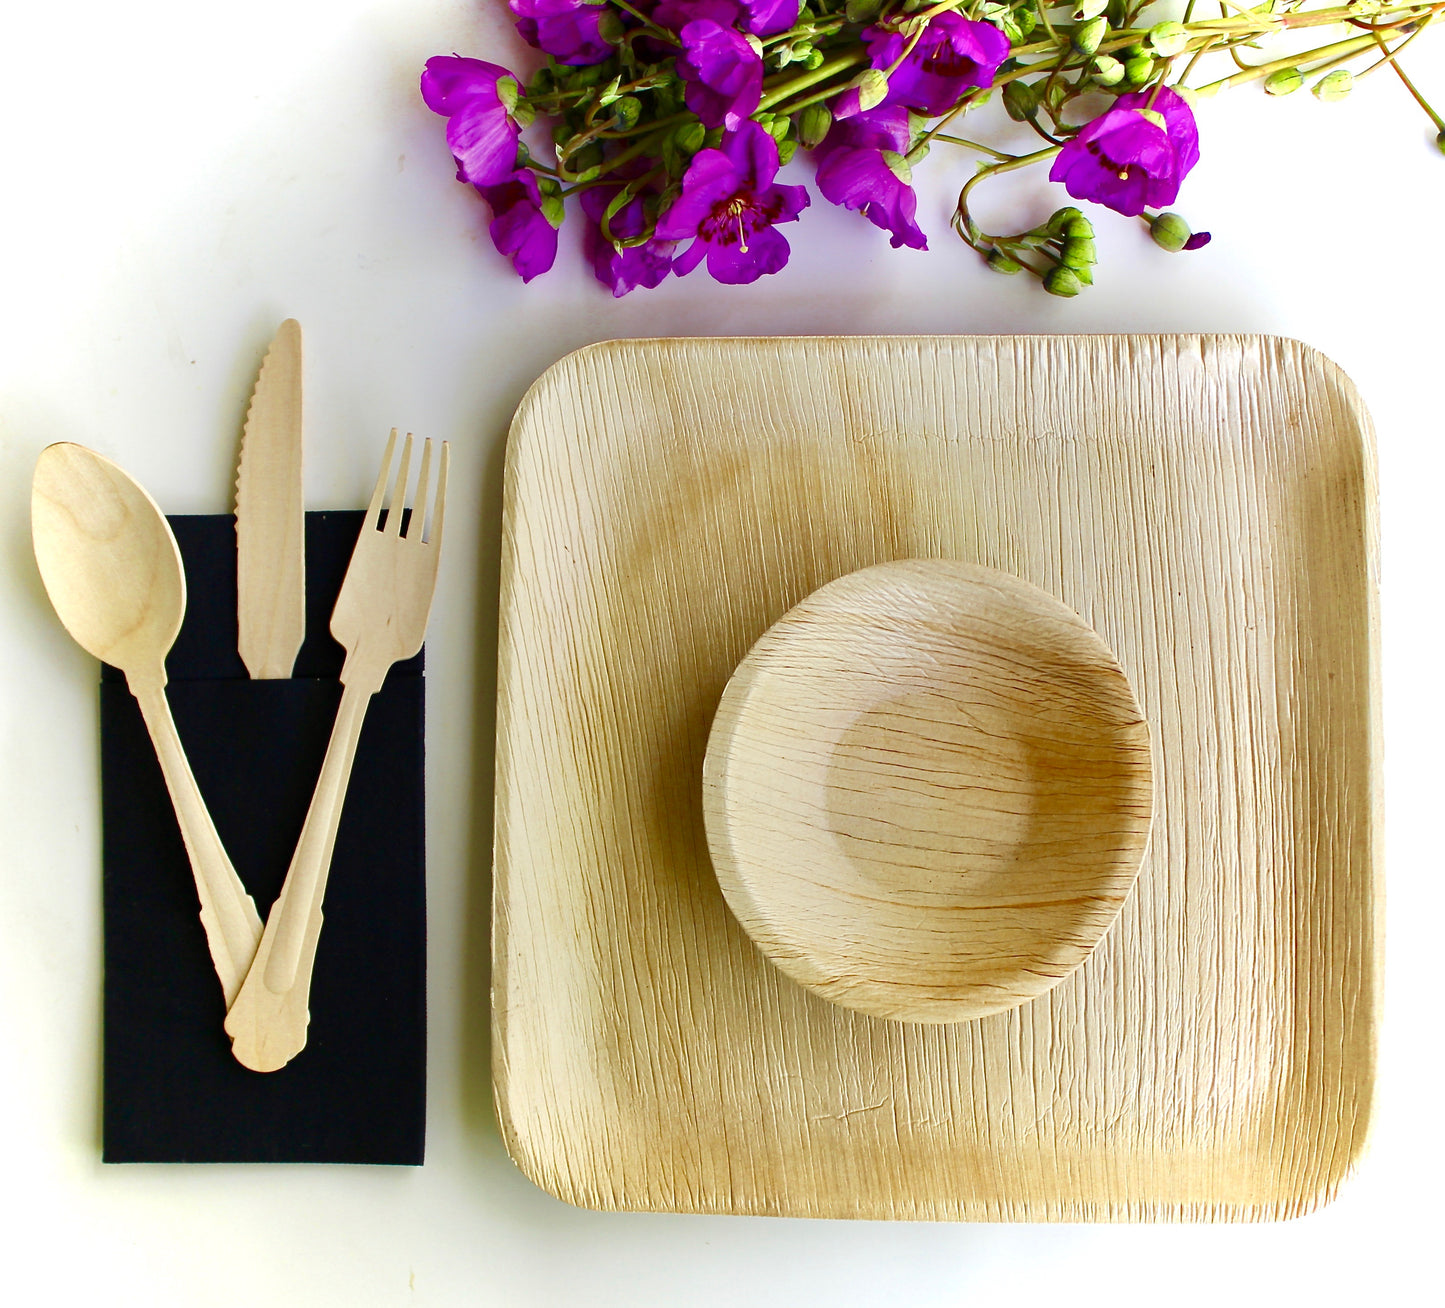 Disposable  wooden cutlery Set from birch wood  75 pic - Fork - Spoon - Knife compostable and Biodegradable